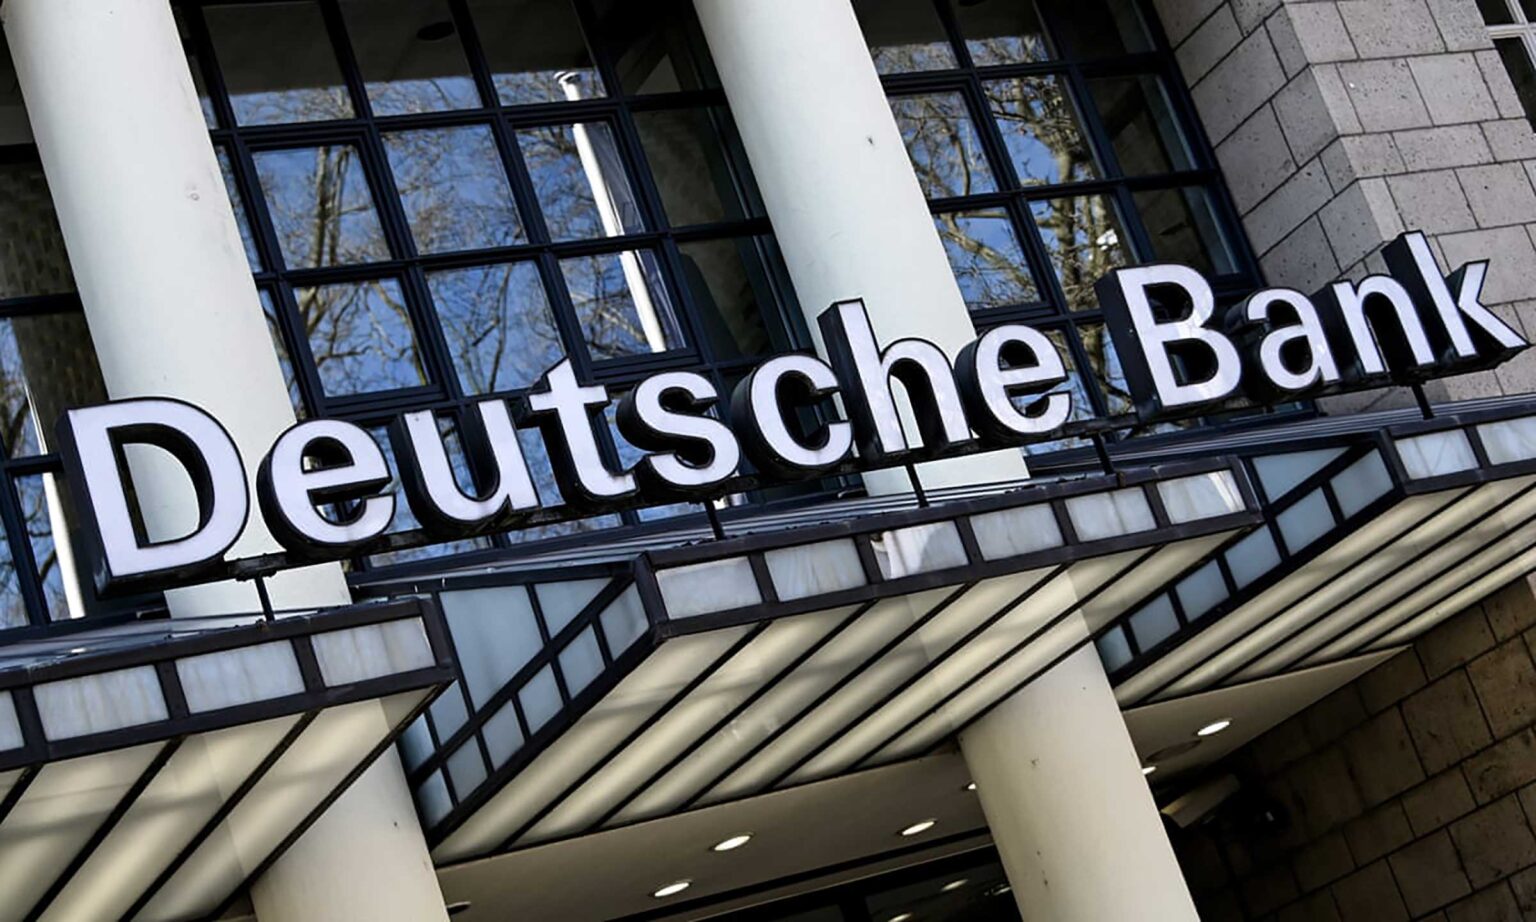 Hold onto your hats Jeffrey Epstein conspiracy theory lovers. Deutsche Bank was forced to cough up $150 million. Here's the latest news.